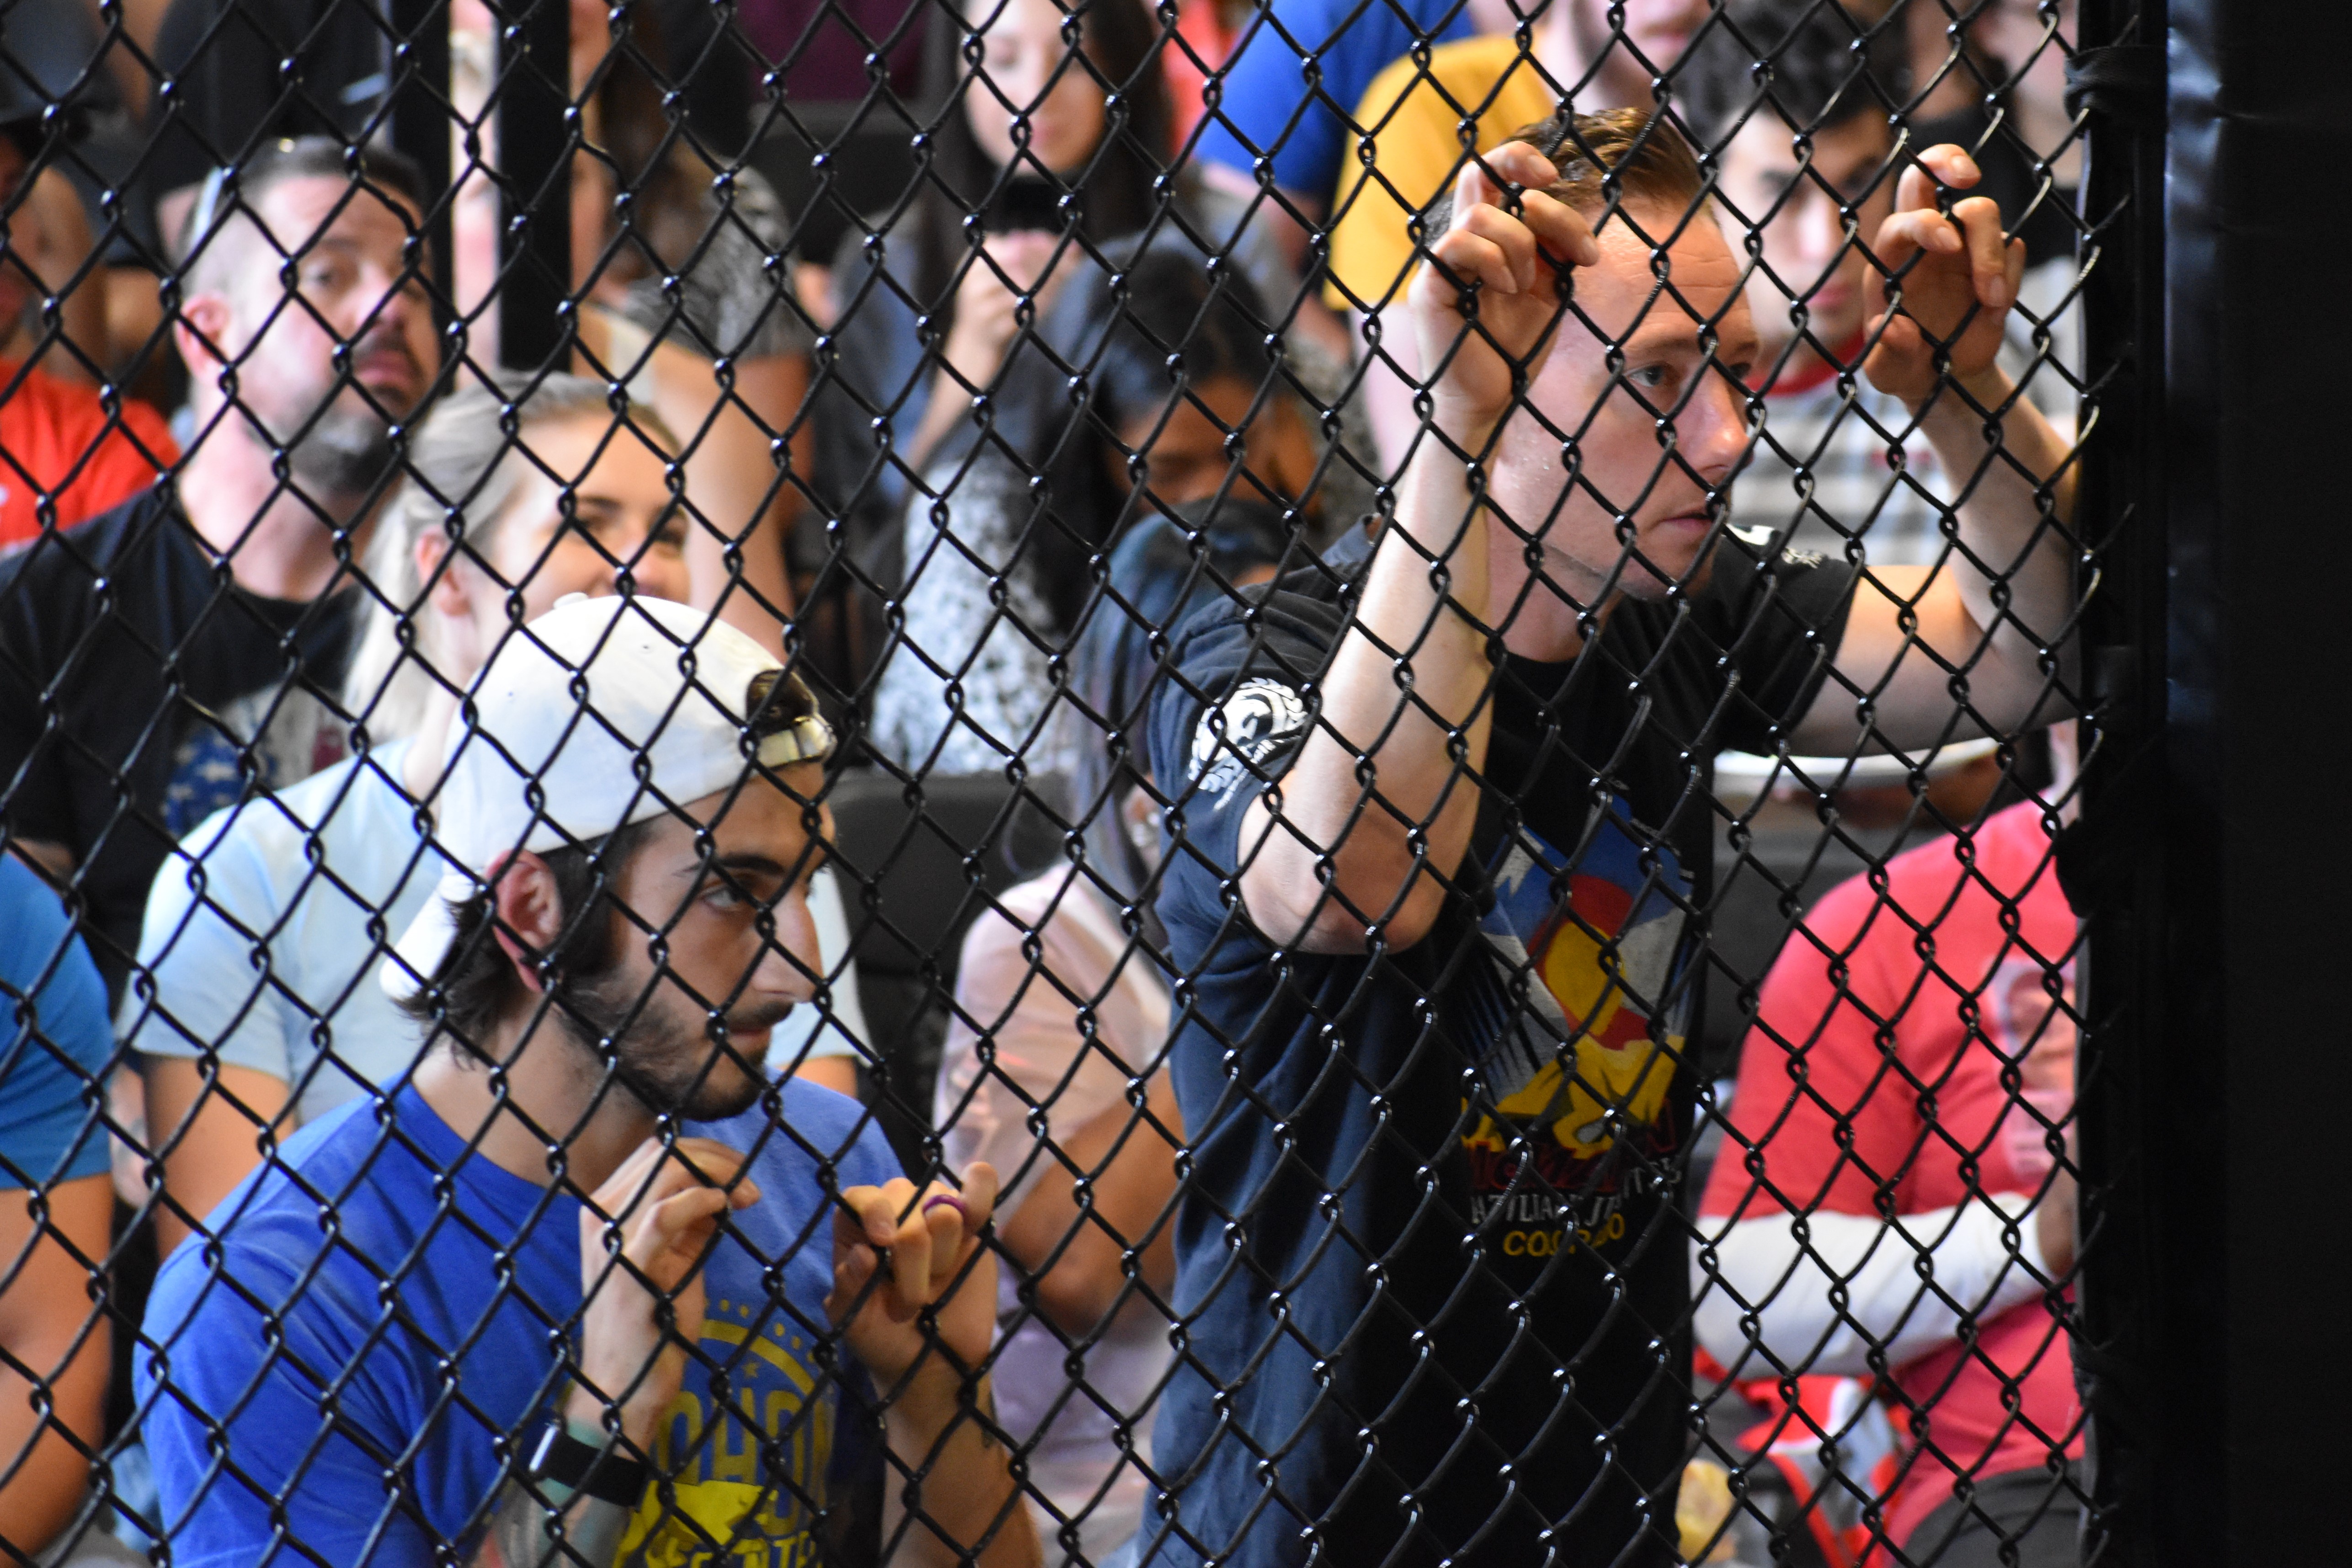 two muay thai coaches watching a fighter compete behind a MMA cage